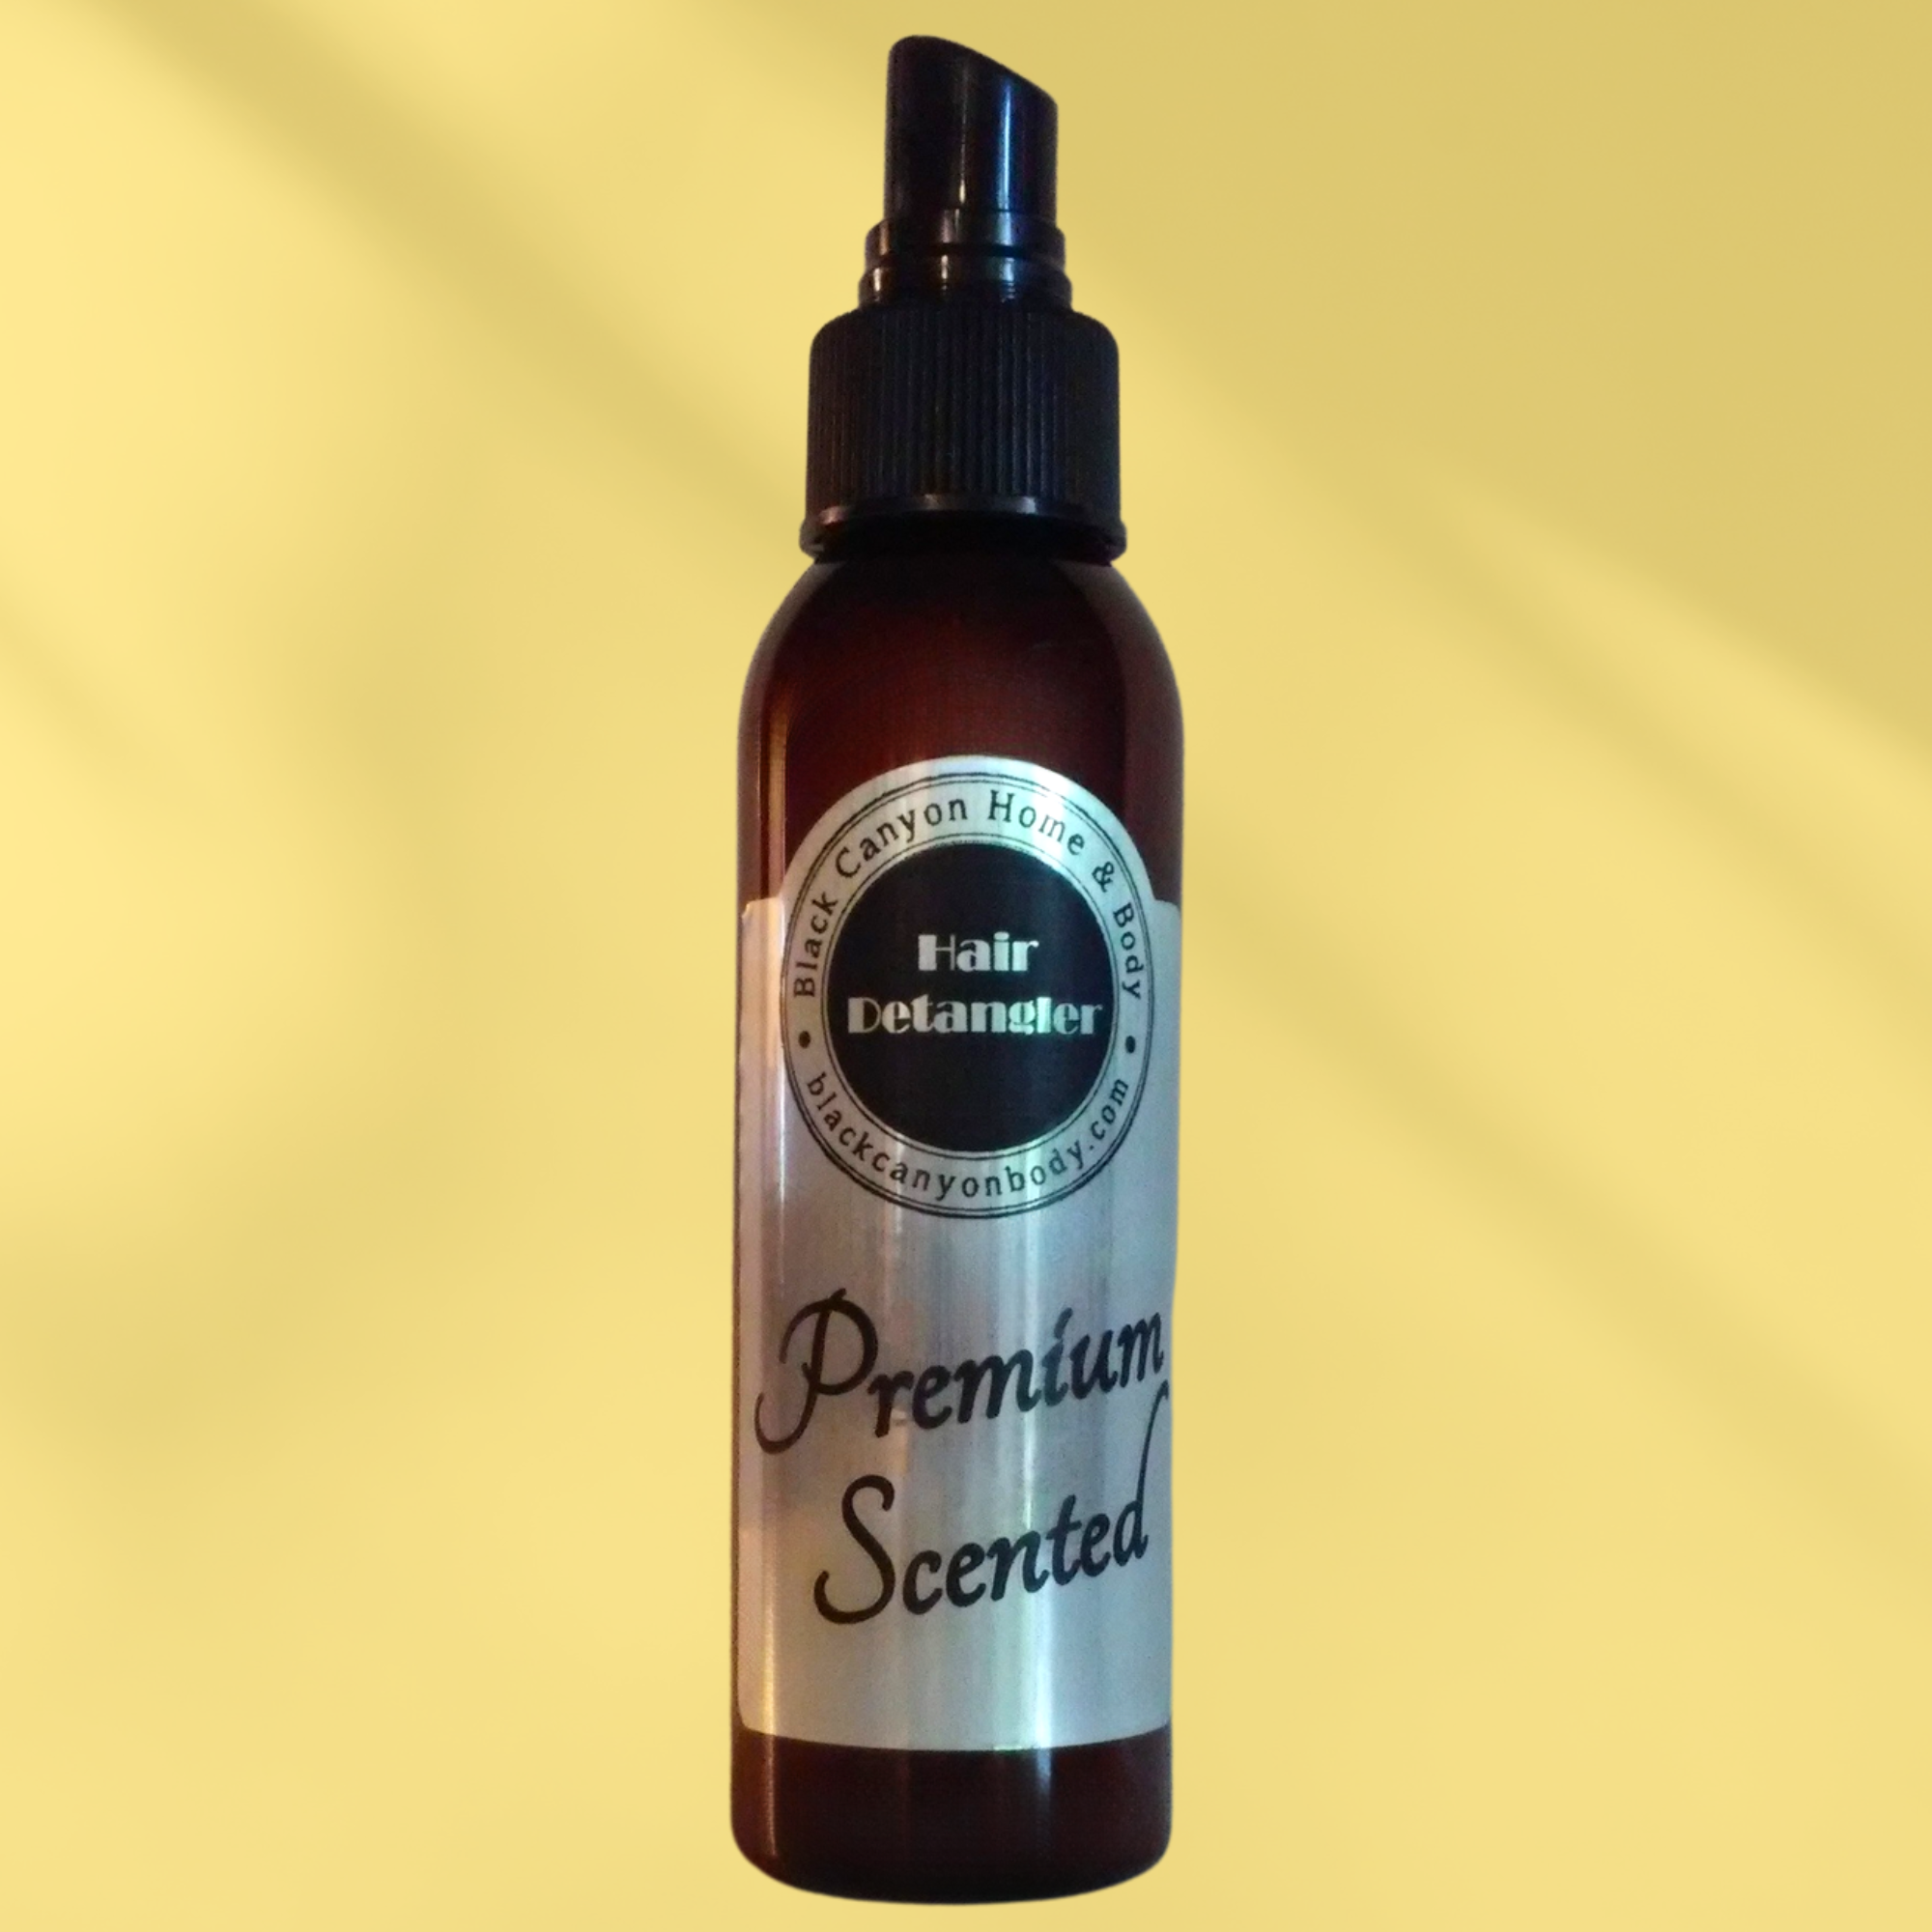 Black Canyon White Chocolate & Watermelon Scented Hair Detangler Spray with Olive Oil